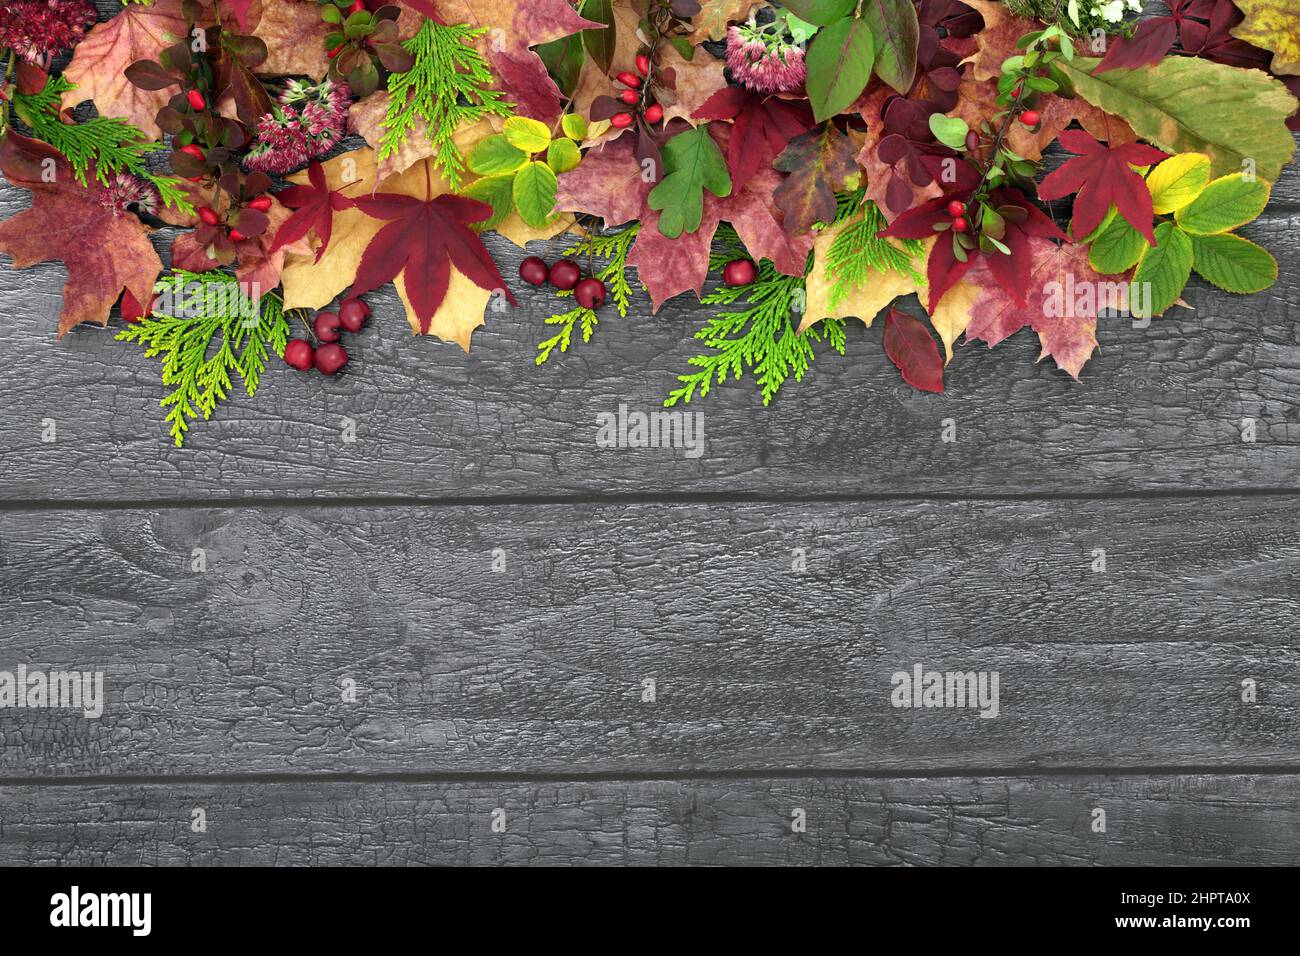 Autumn and Thanksgiving abstract natural background border on rustic wood with colourful collection of European leaf sprigs berries and flora. Composi Stock Photo